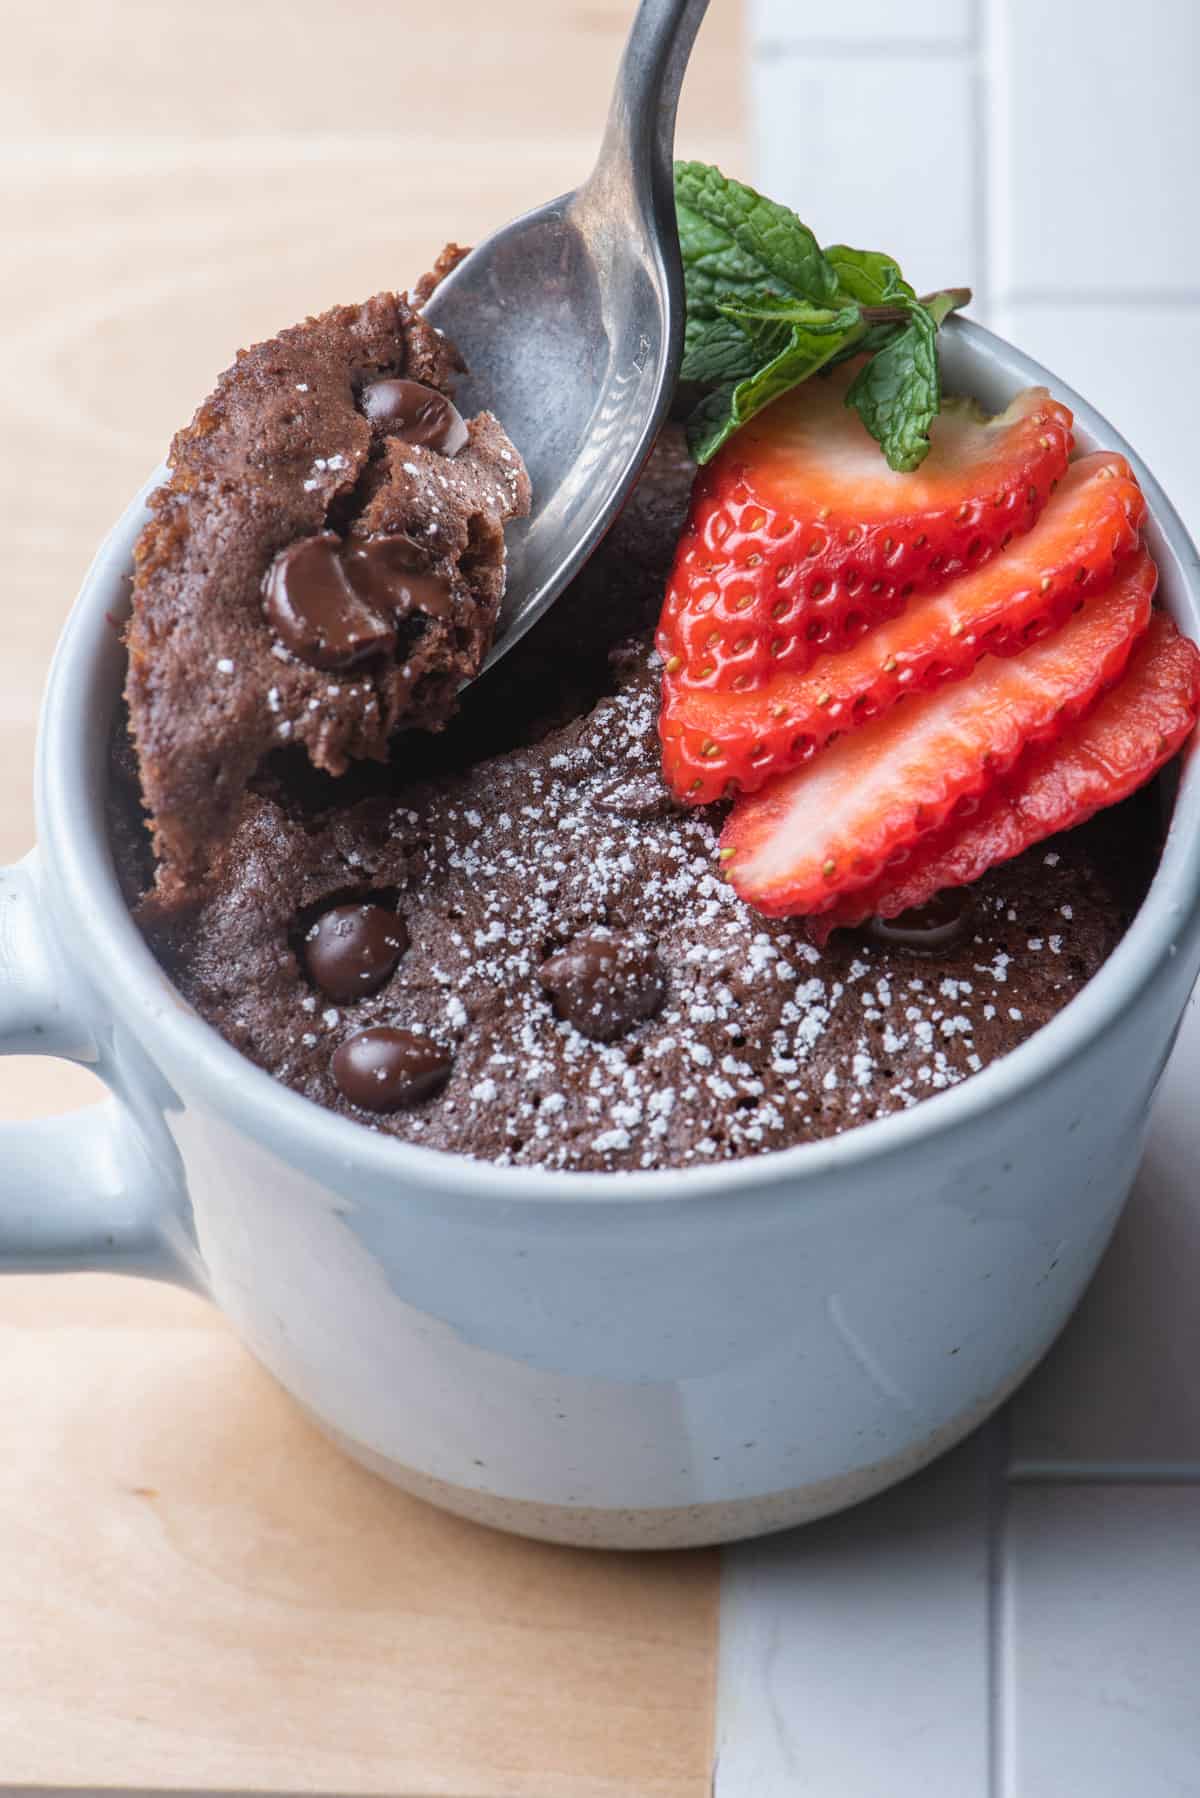 Spoon taking bite out of chocolate mug cake with strawberry slices on top